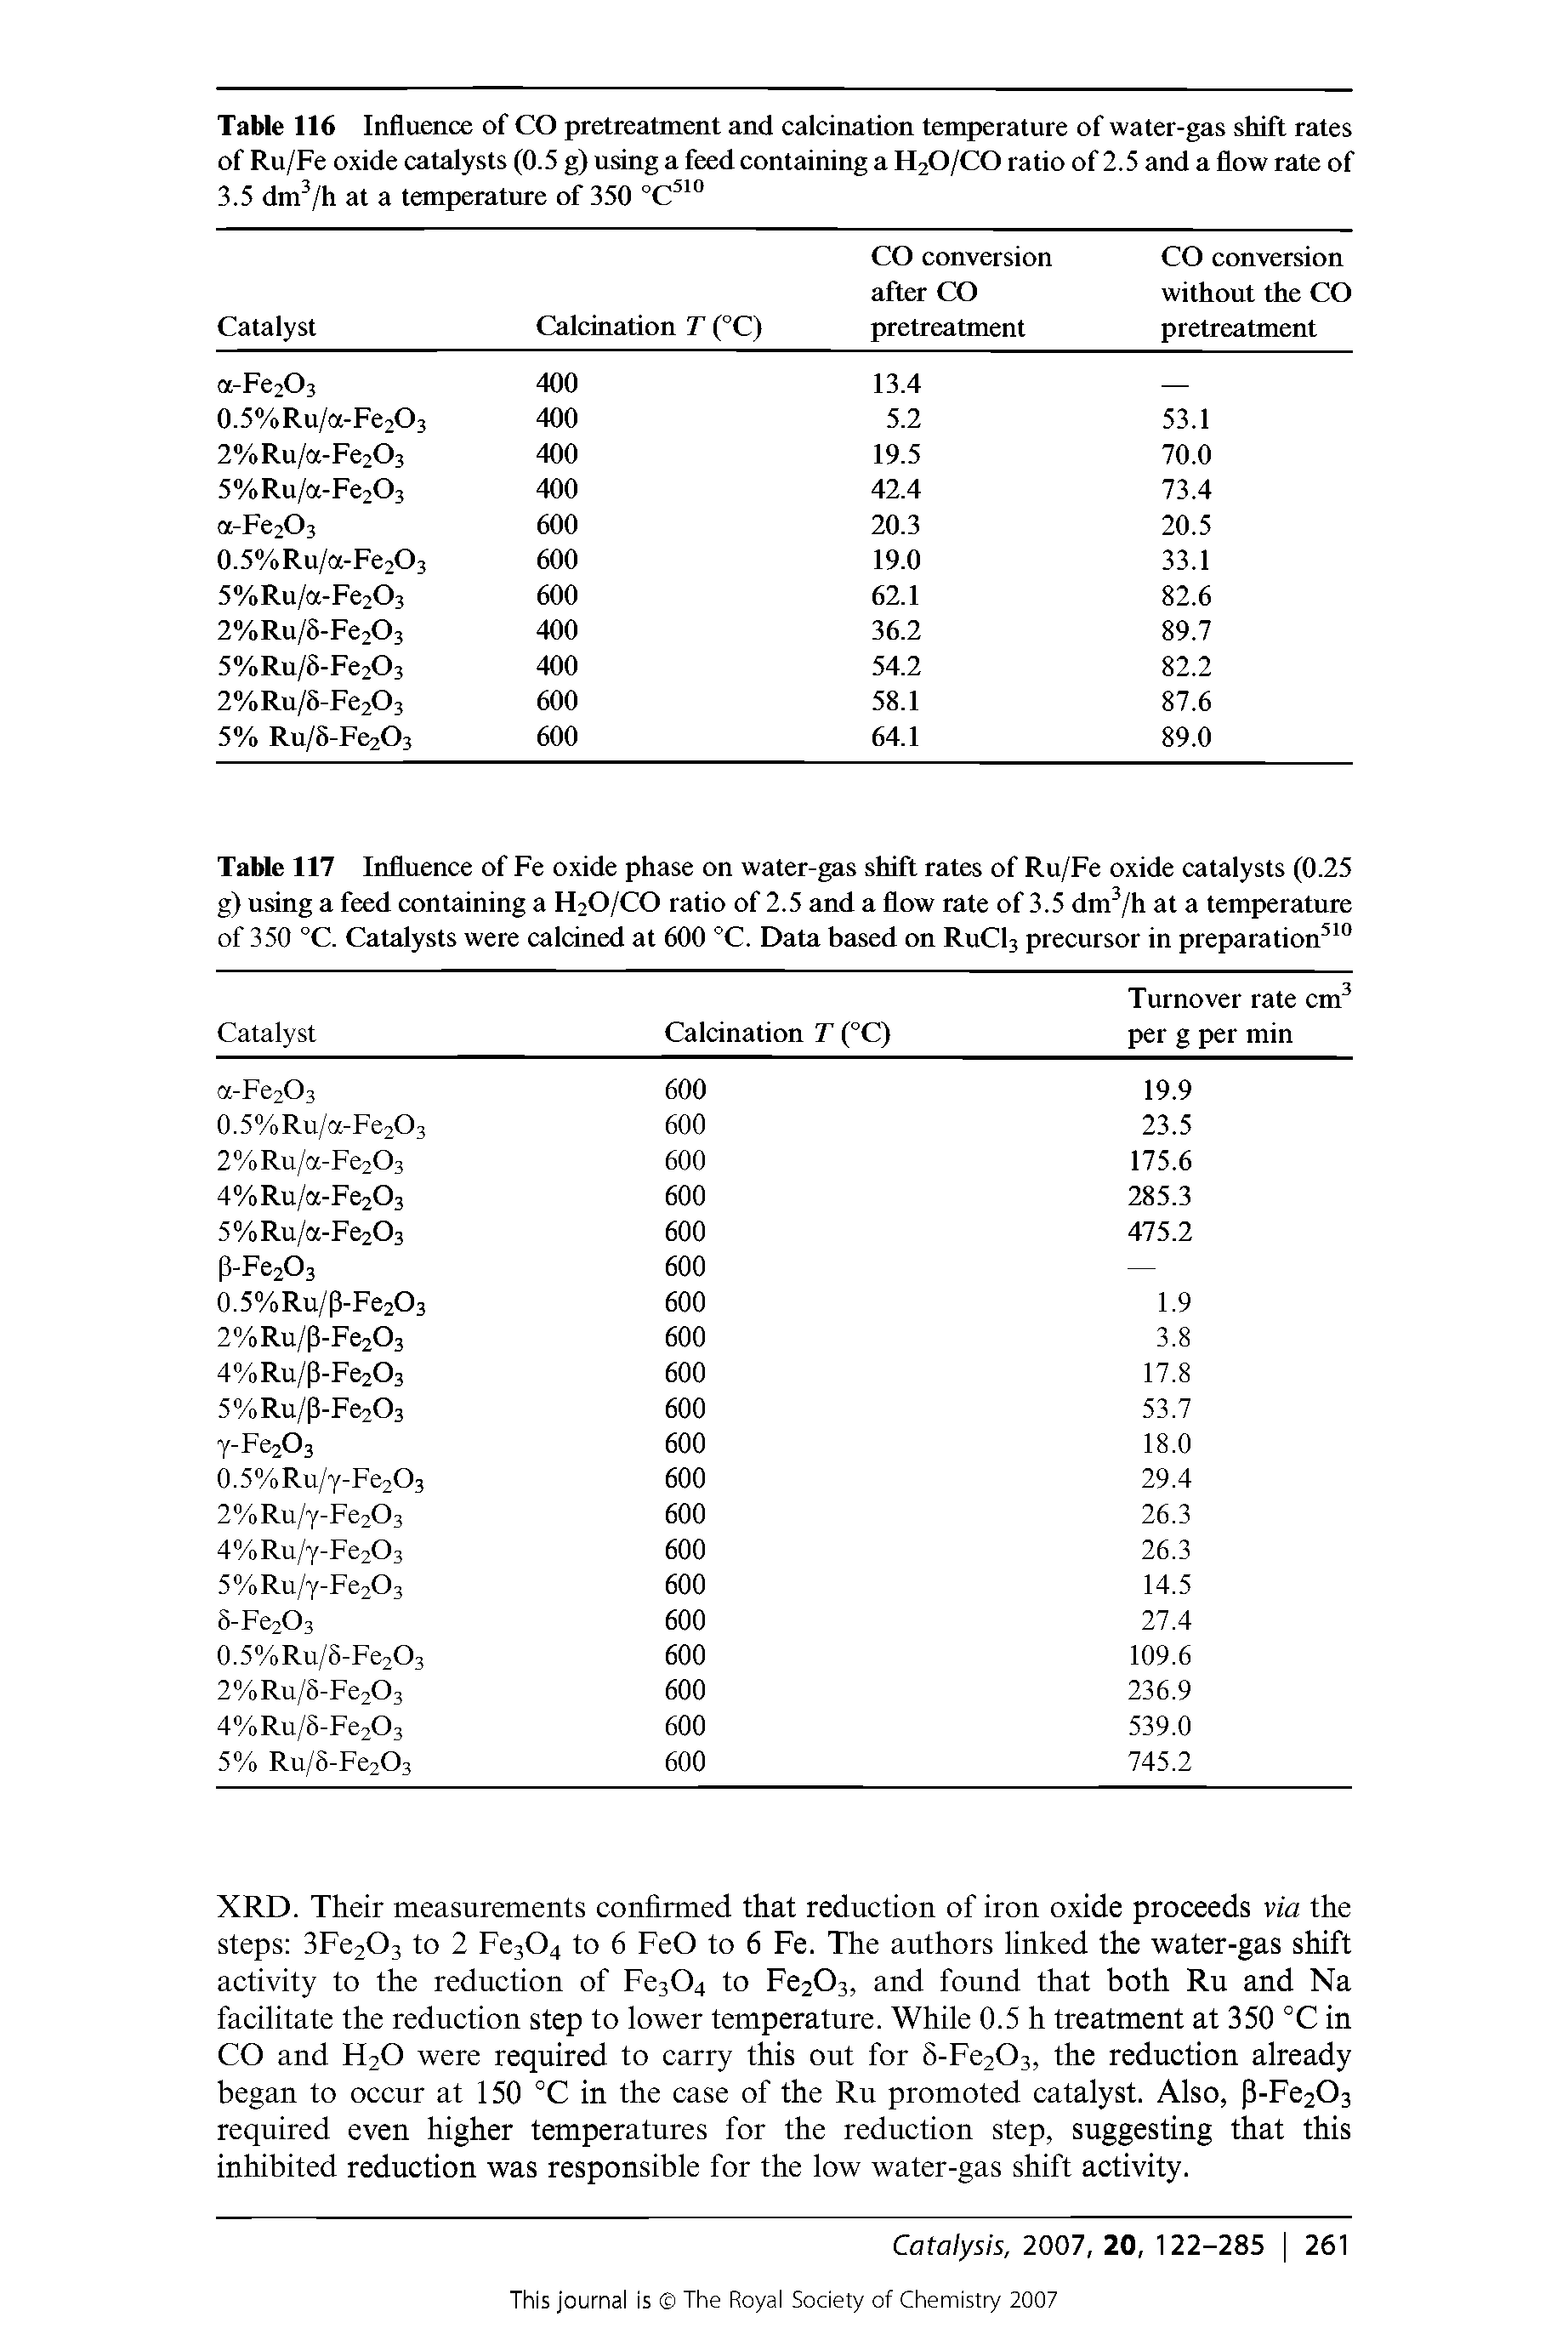 Table 117 Influence of Fe oxide phase on water-gas shift rates of Ru/Fe oxide catalysts (0.25 g) using a feed containing a H2O/CO ratio of 2.5 and a flow rate of 3.5 dm3/h at a temperature of 350 °C. Catalysts were calcined at 600 °C. Data based on RuC13 precursor in preparation510...